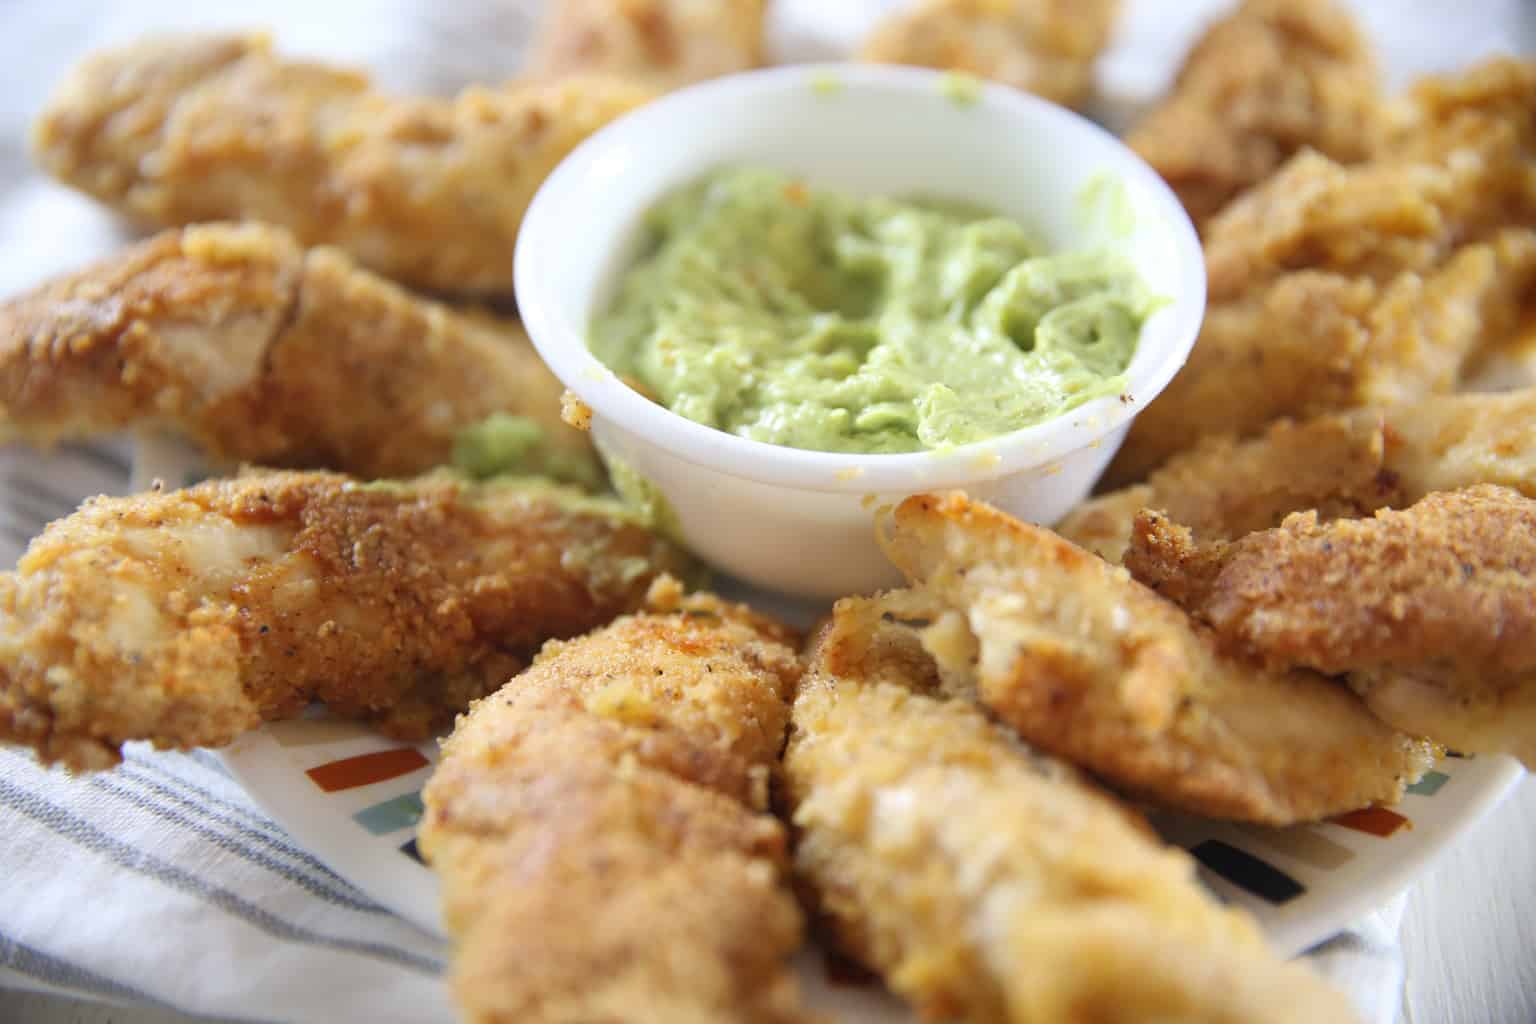 Chicken strips with avocado dipping sauce on white plate.